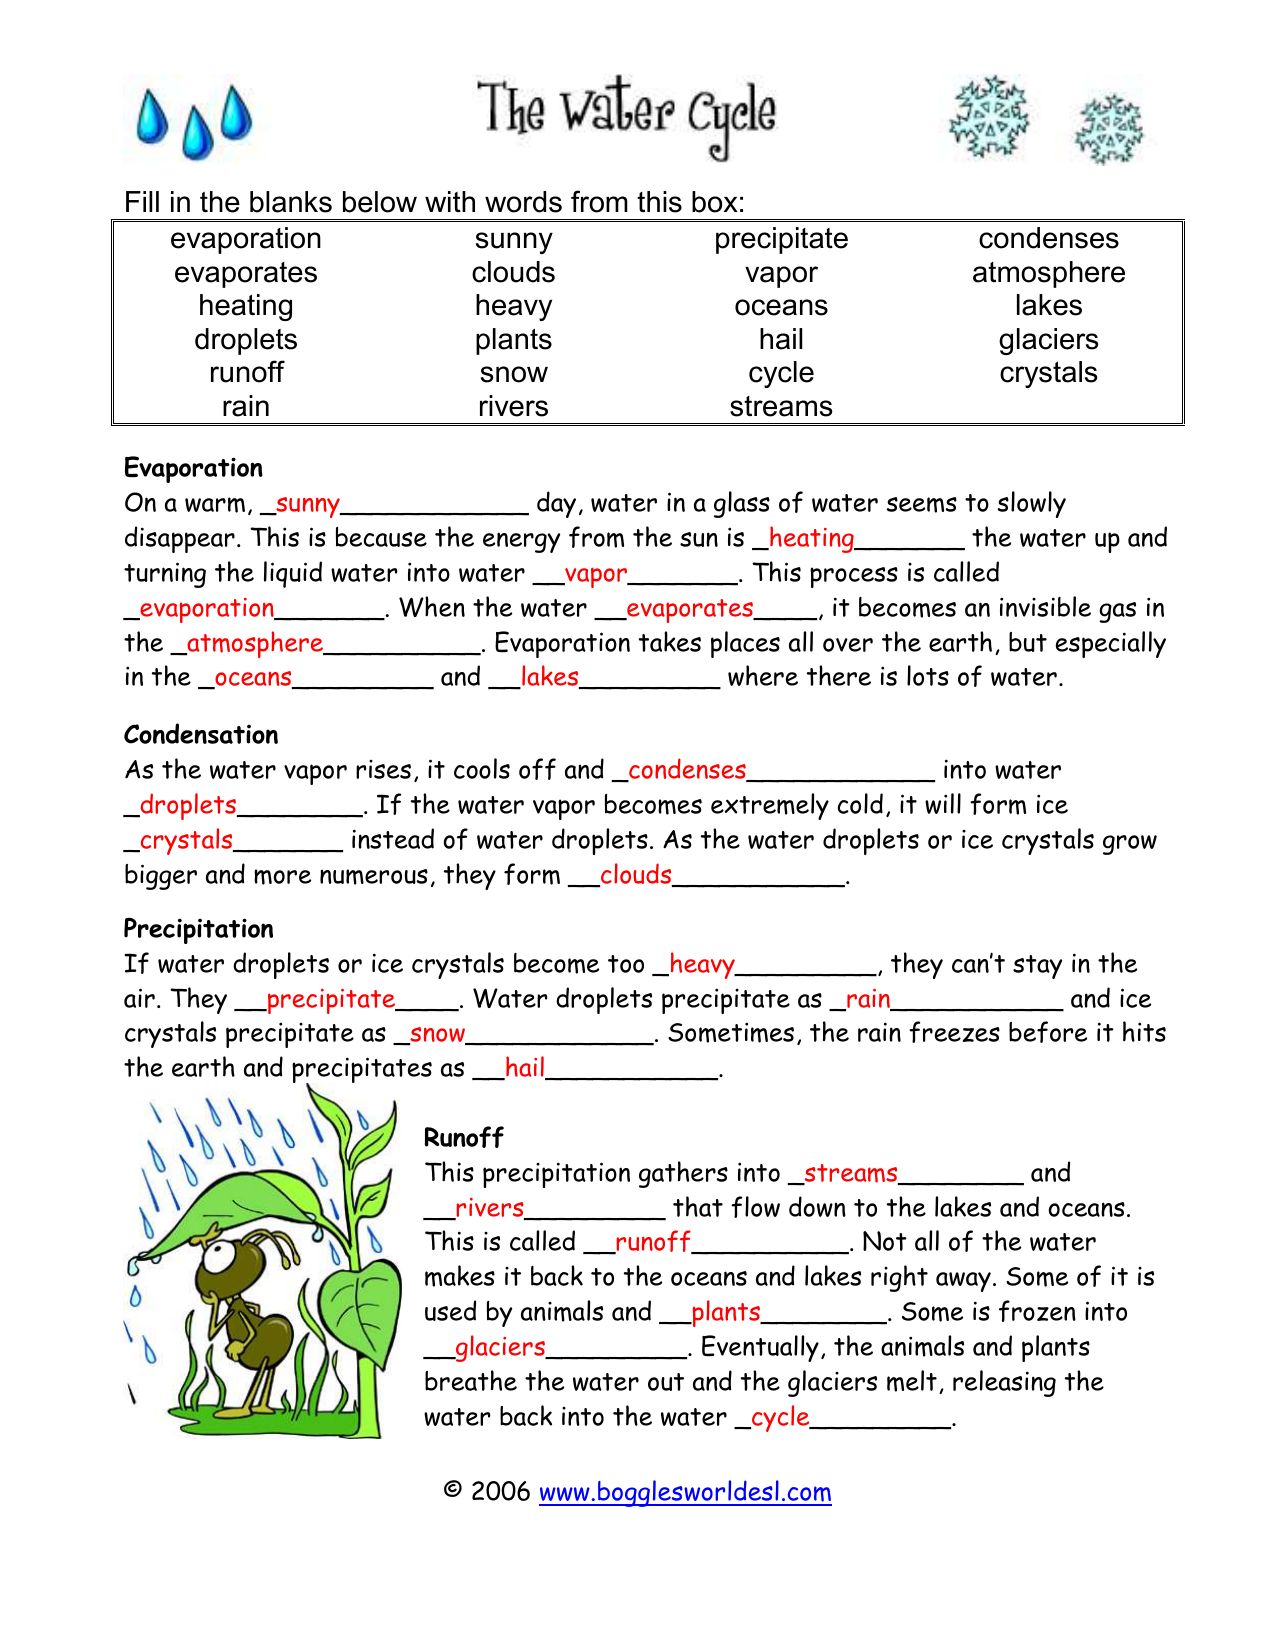 Water Cycle Cloze and Crossword KEY Inside The Water Cycle Worksheet Answers